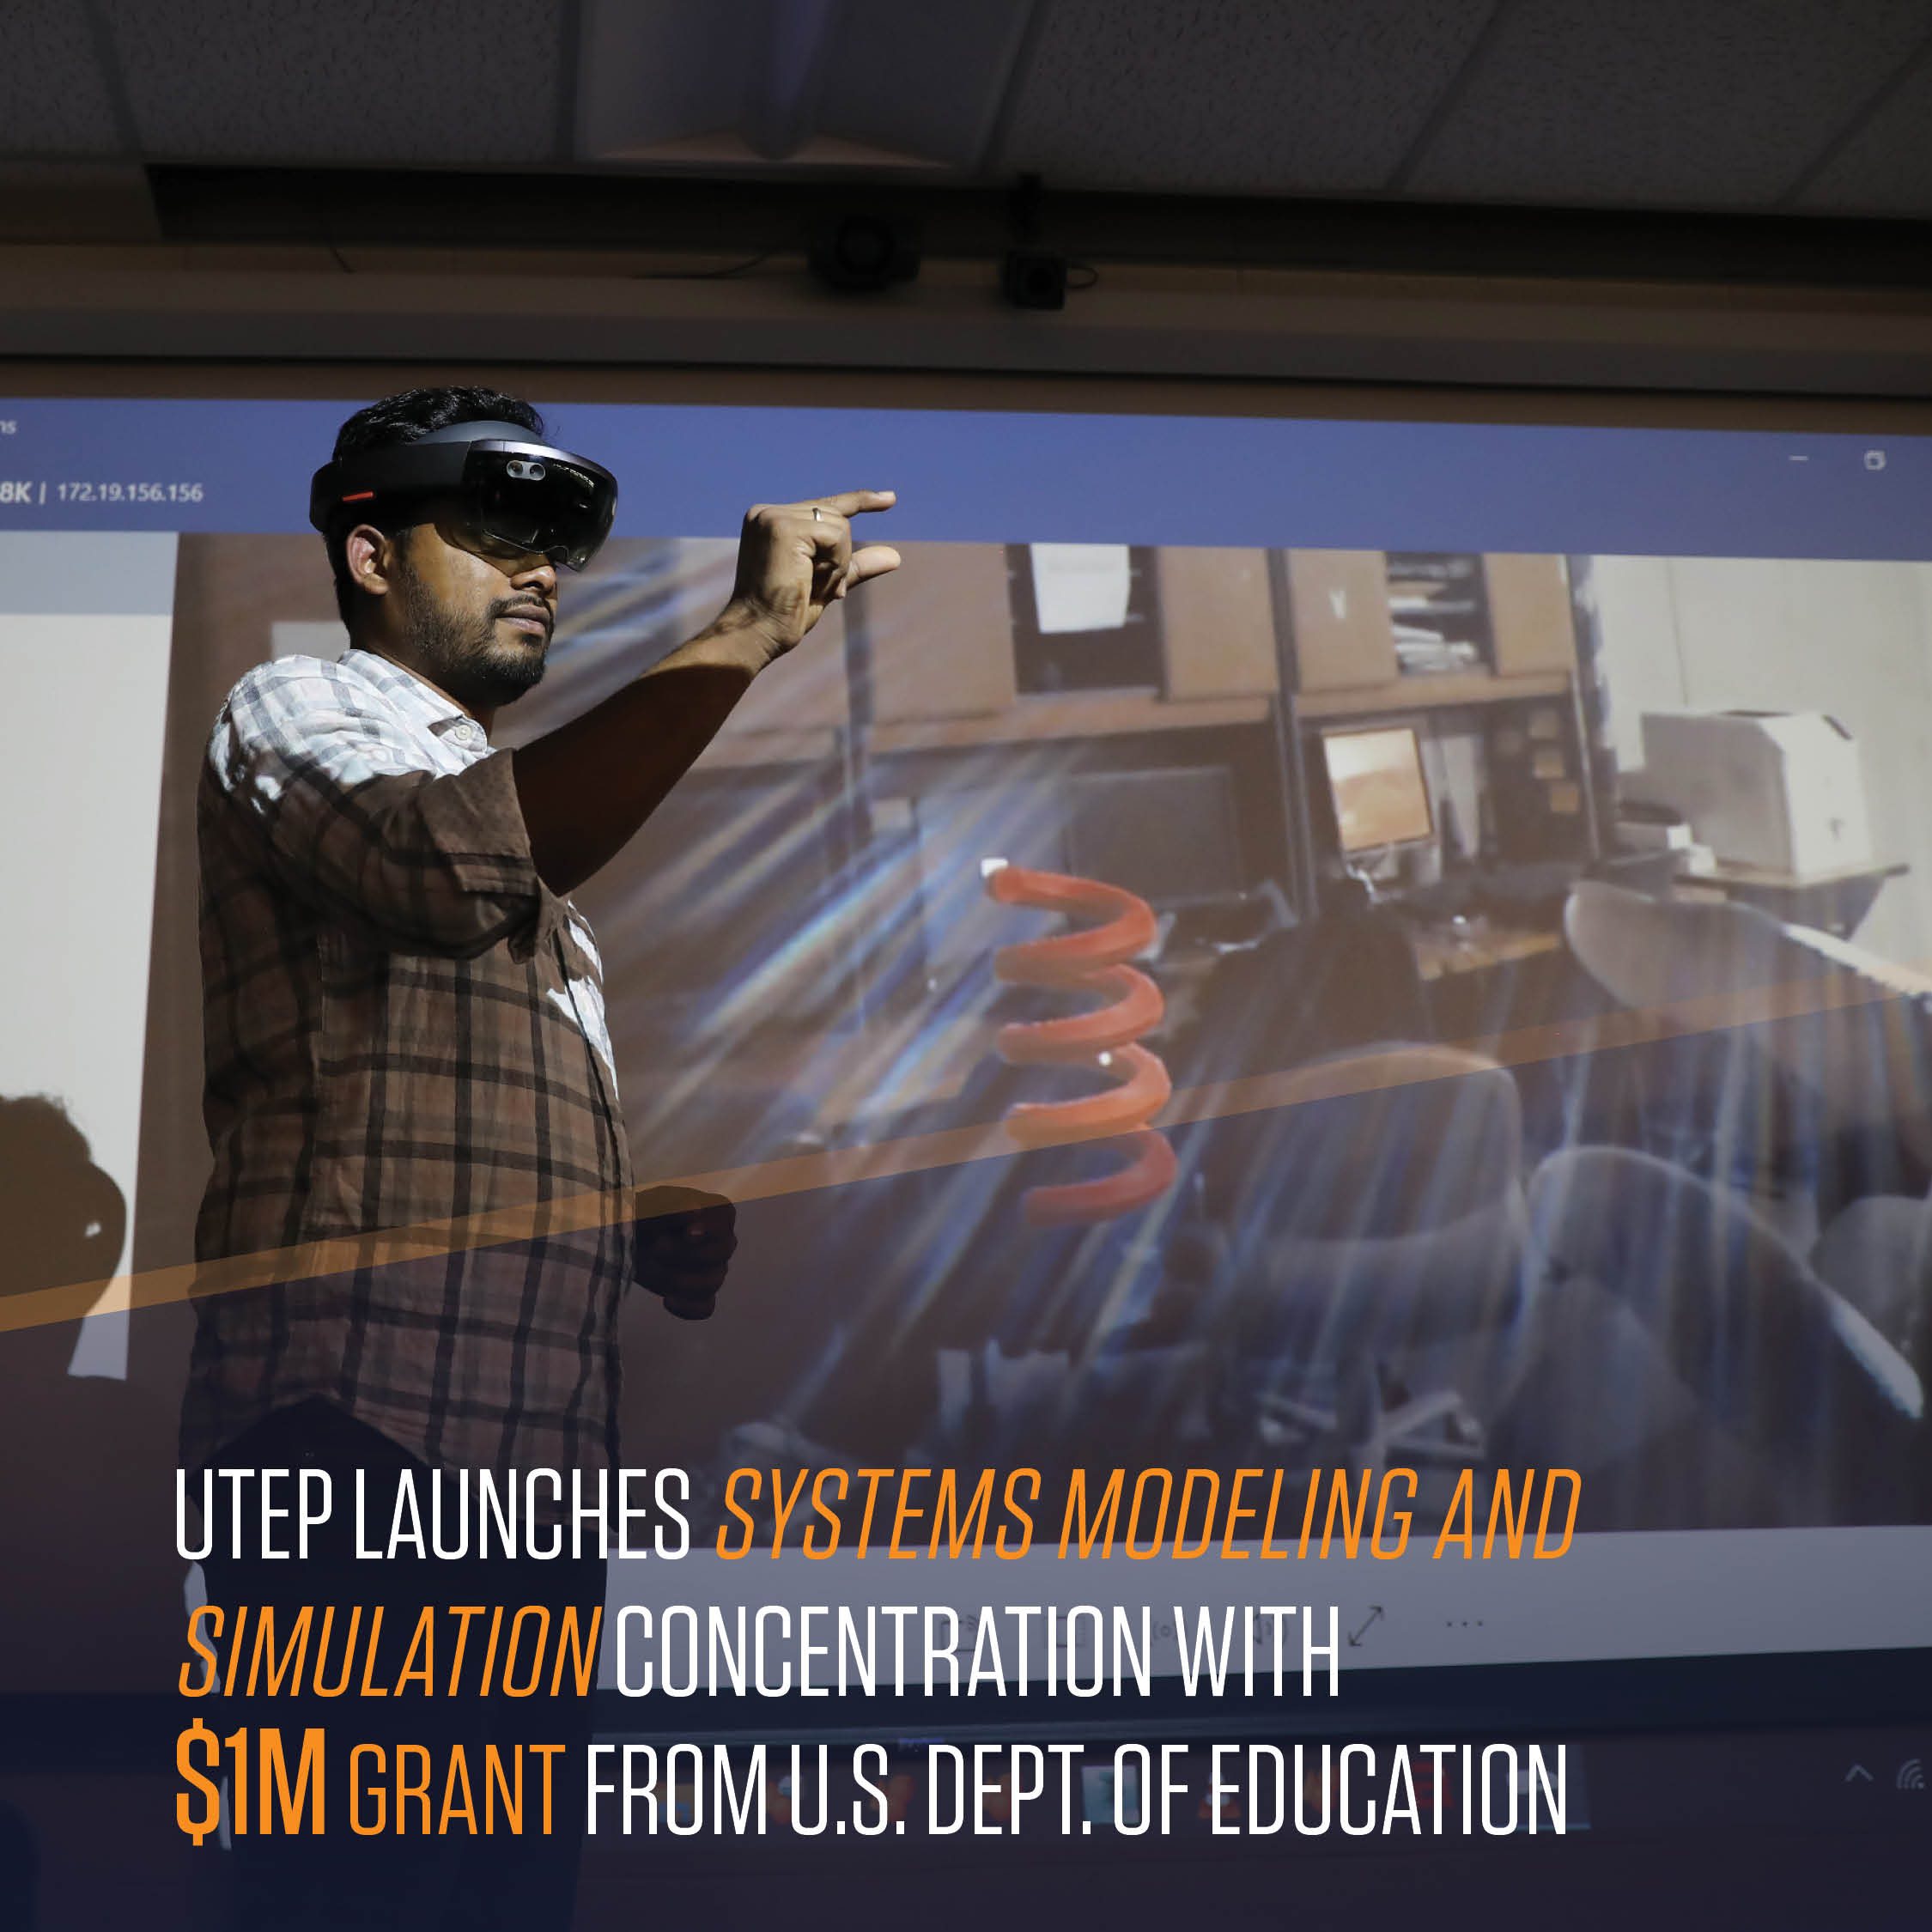 UTEP Launches Systems Modeling and Simulation Concentration with $1M Grant from U.S. Dept. of Education